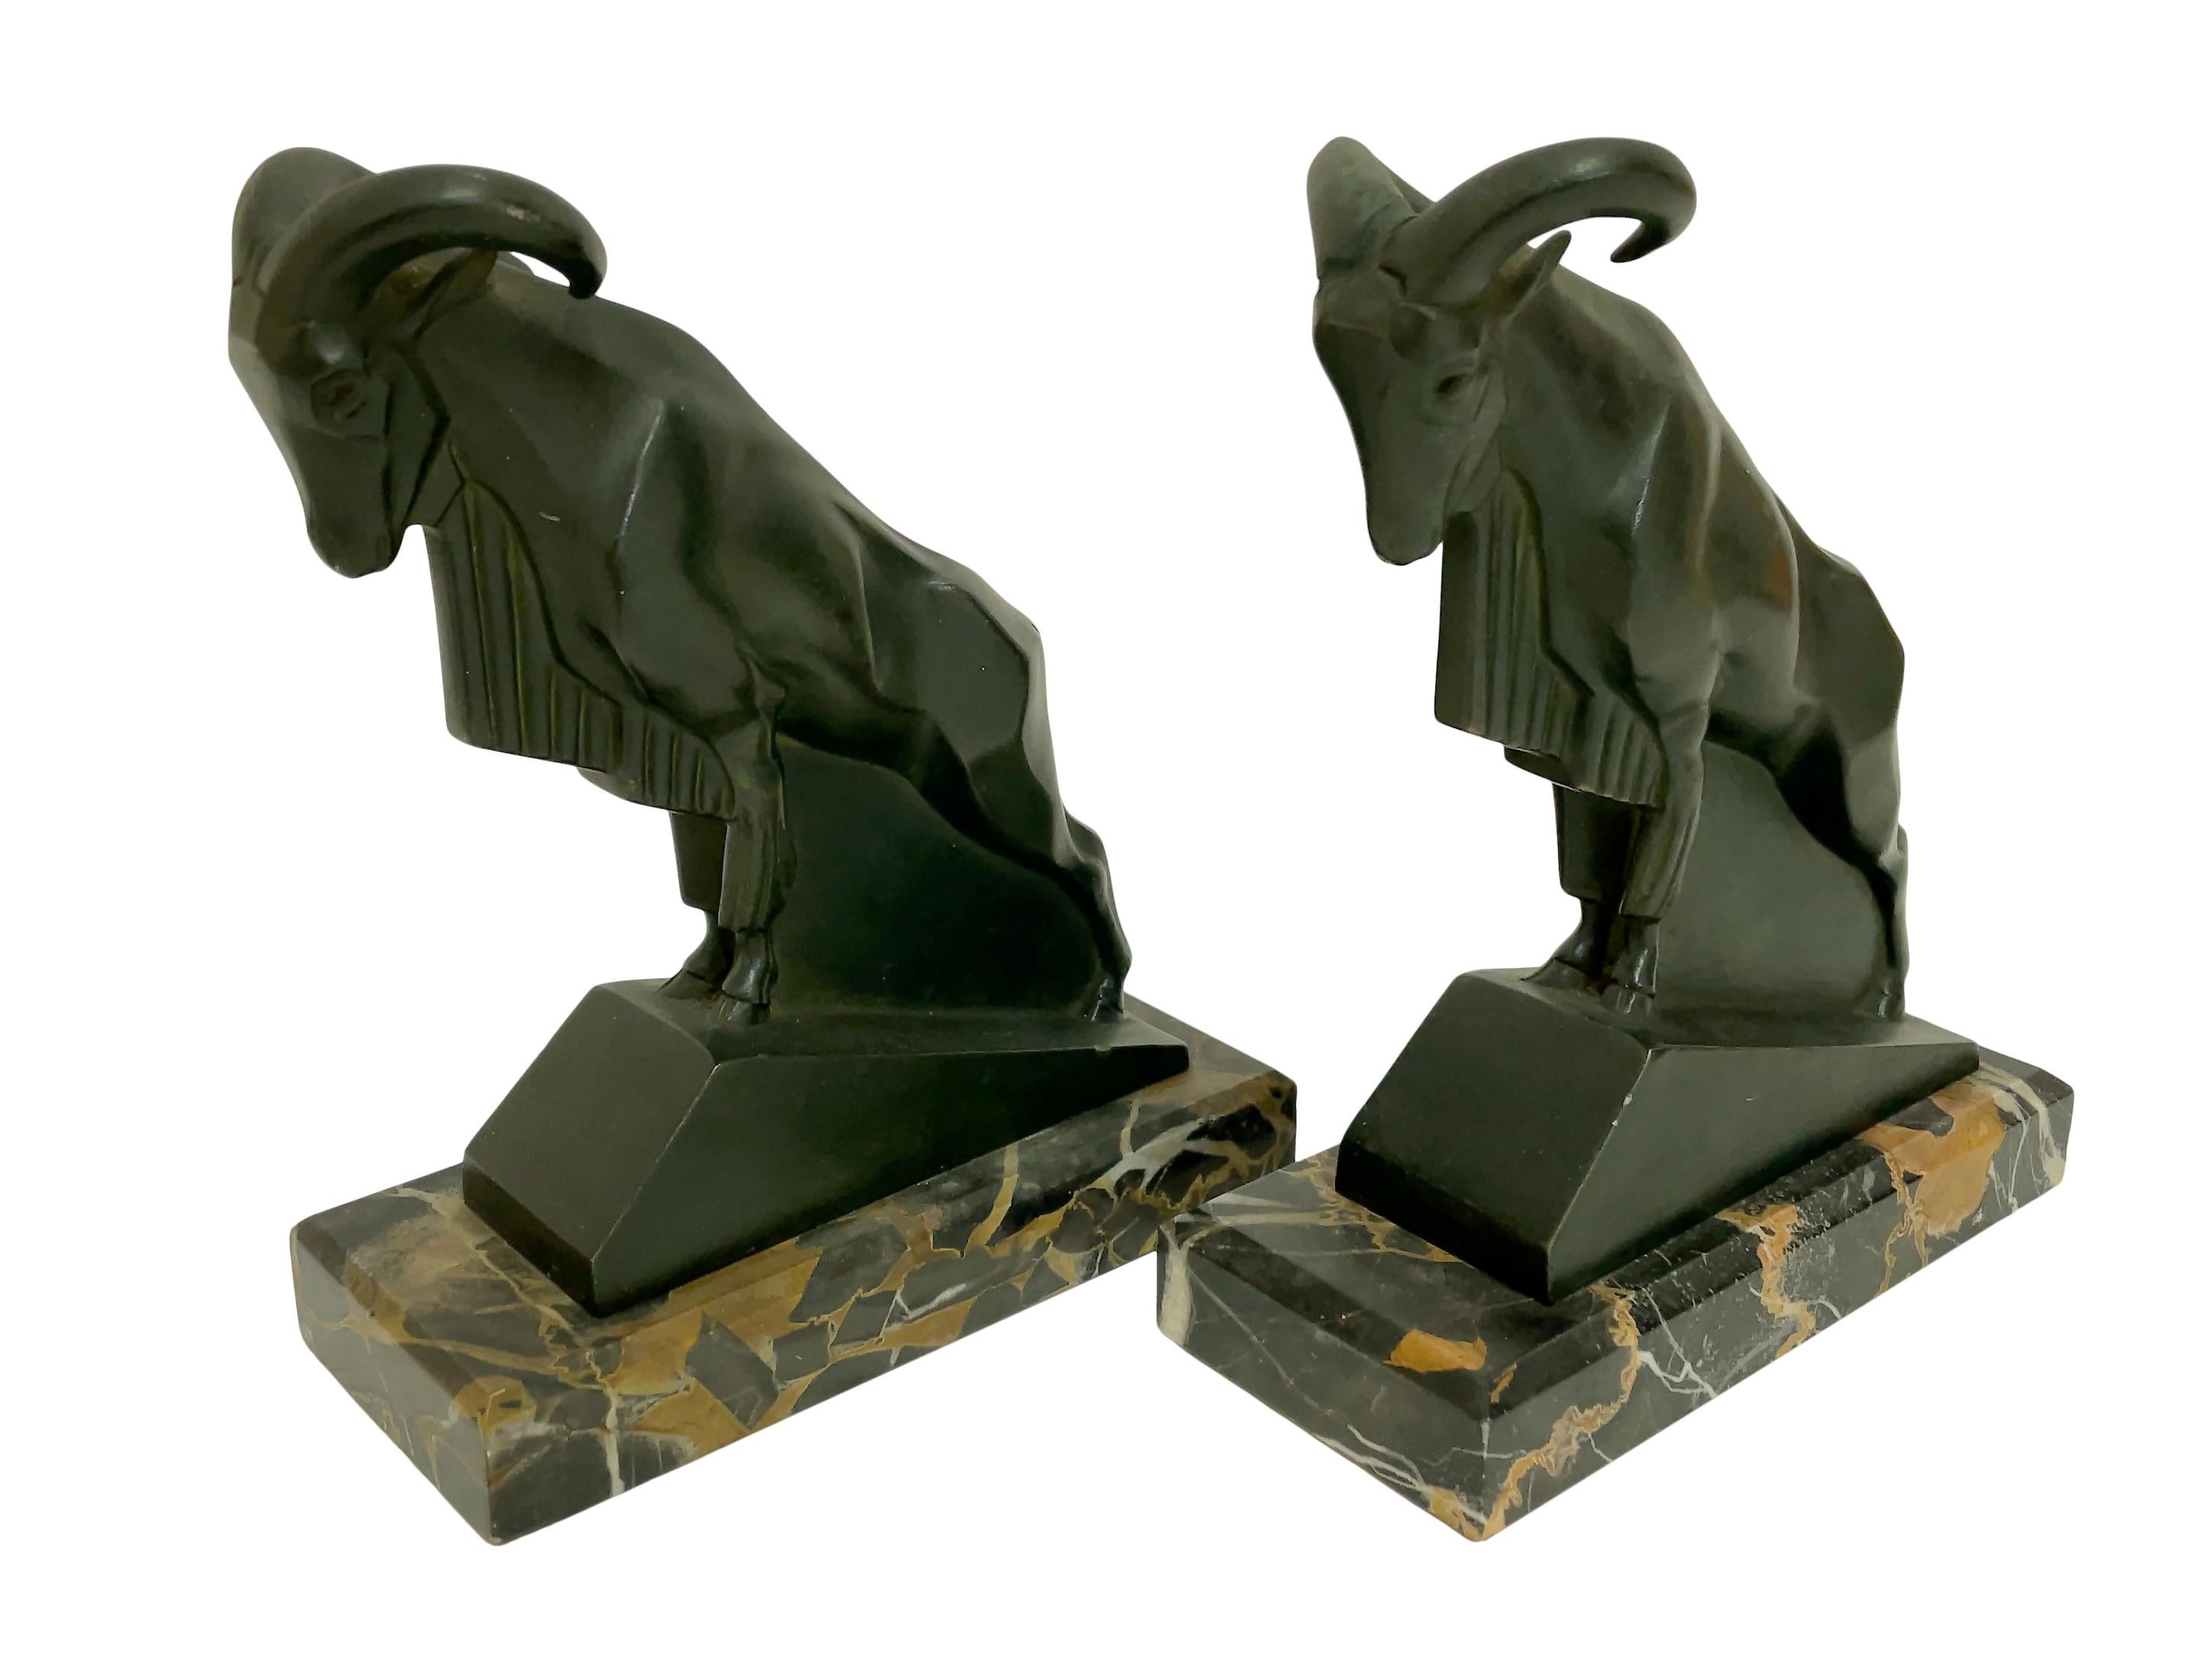 French Mouflon Original Art Deco Bookends of Two Aries by Max Le Verrier with Patina